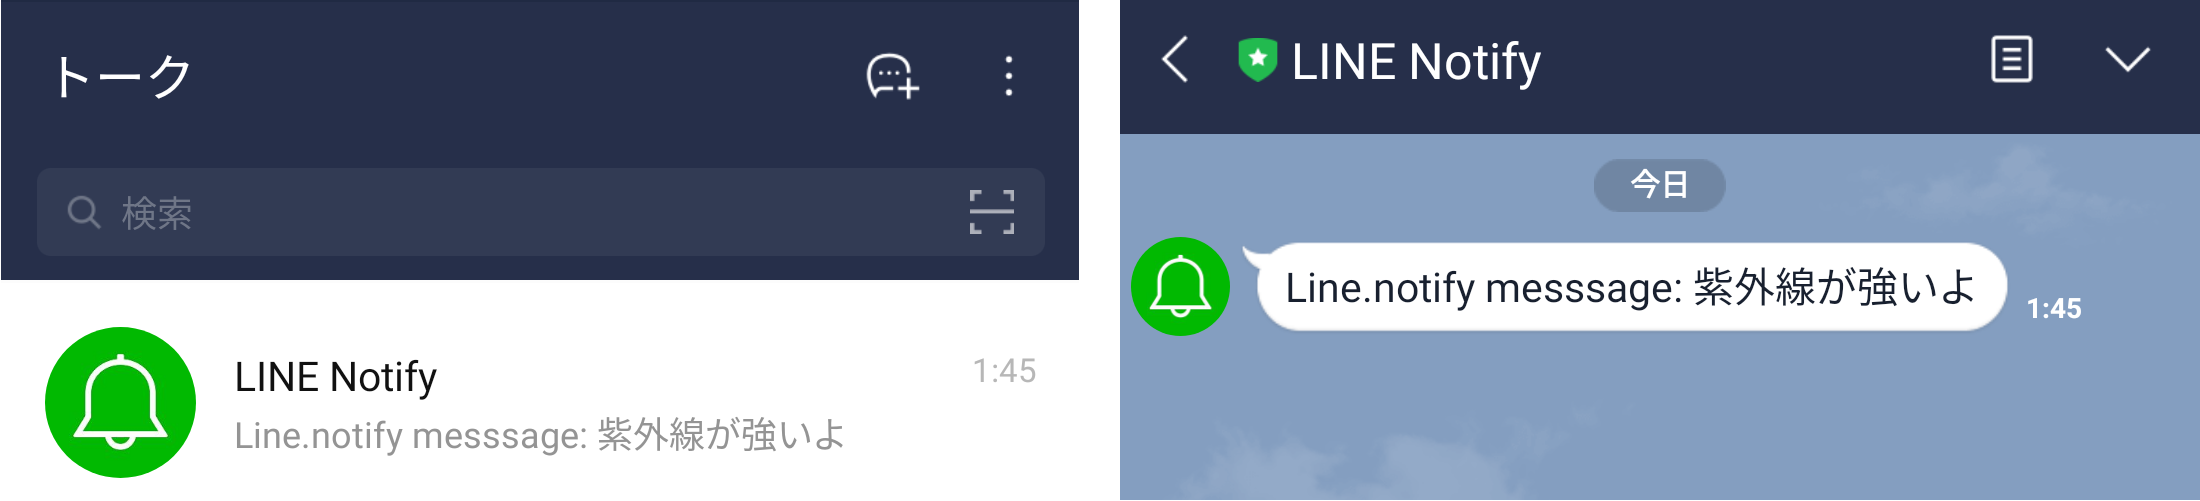 line_notify.png